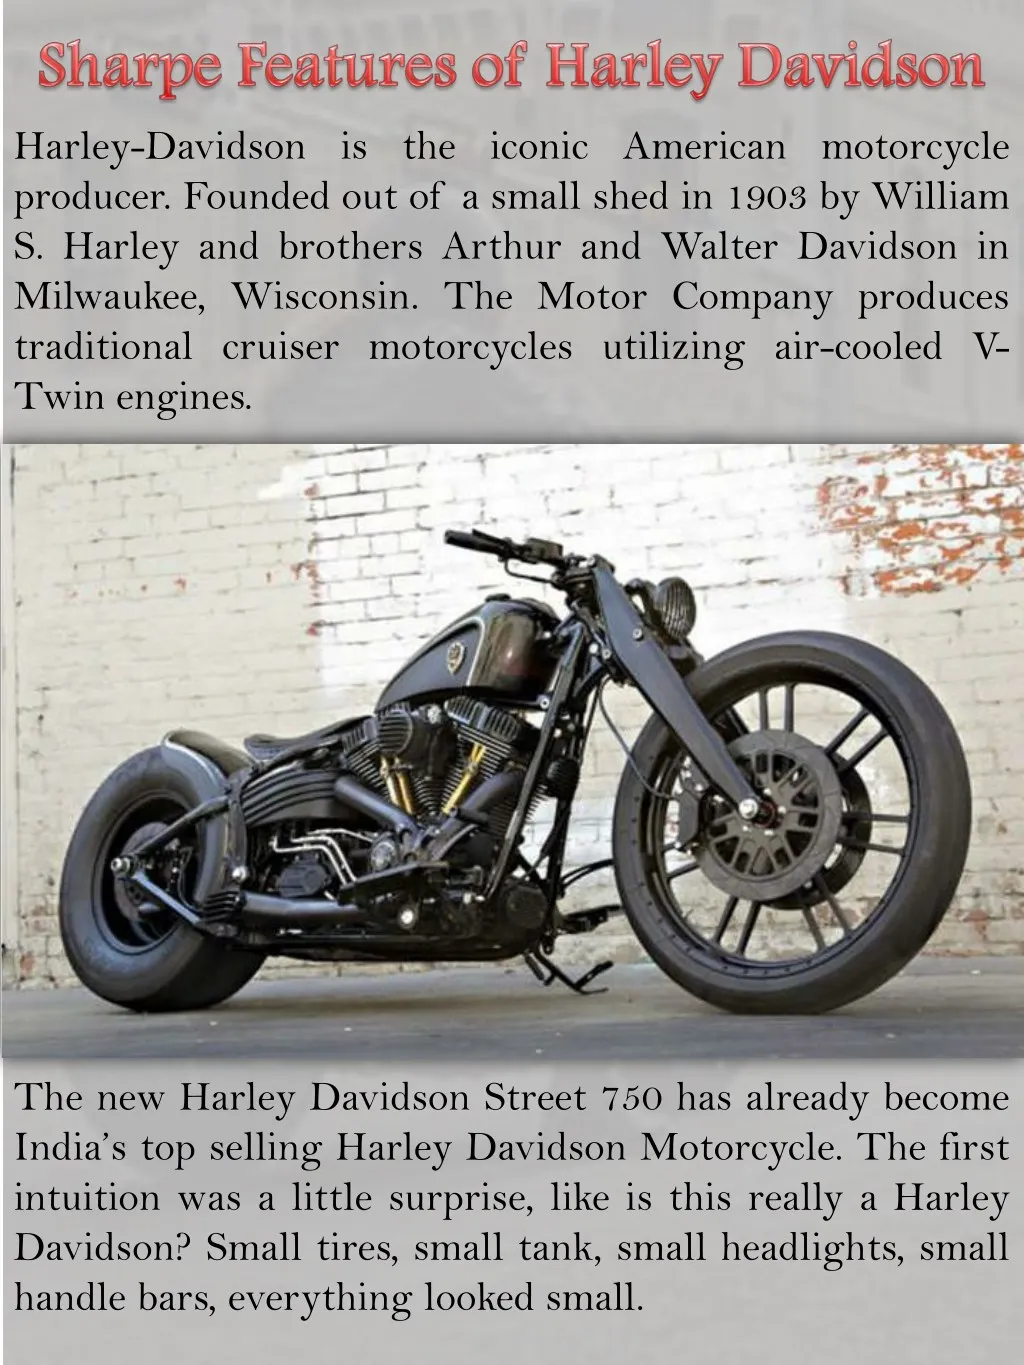 harley davidson is the iconic american motorcycle